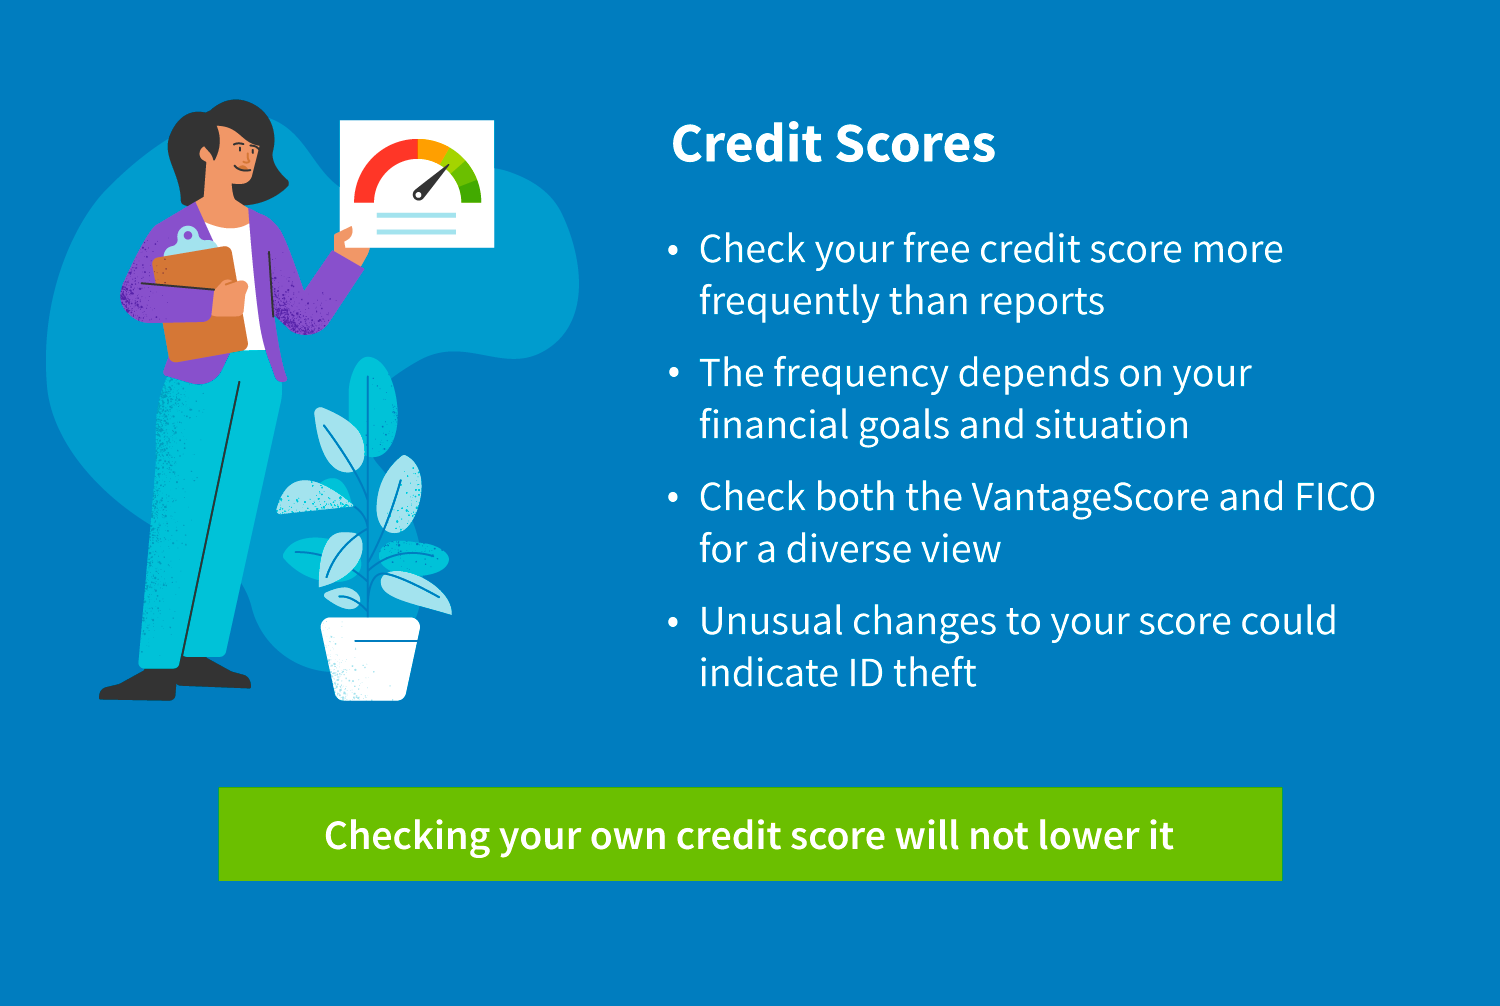 Where I Can Check My Credit Score Free